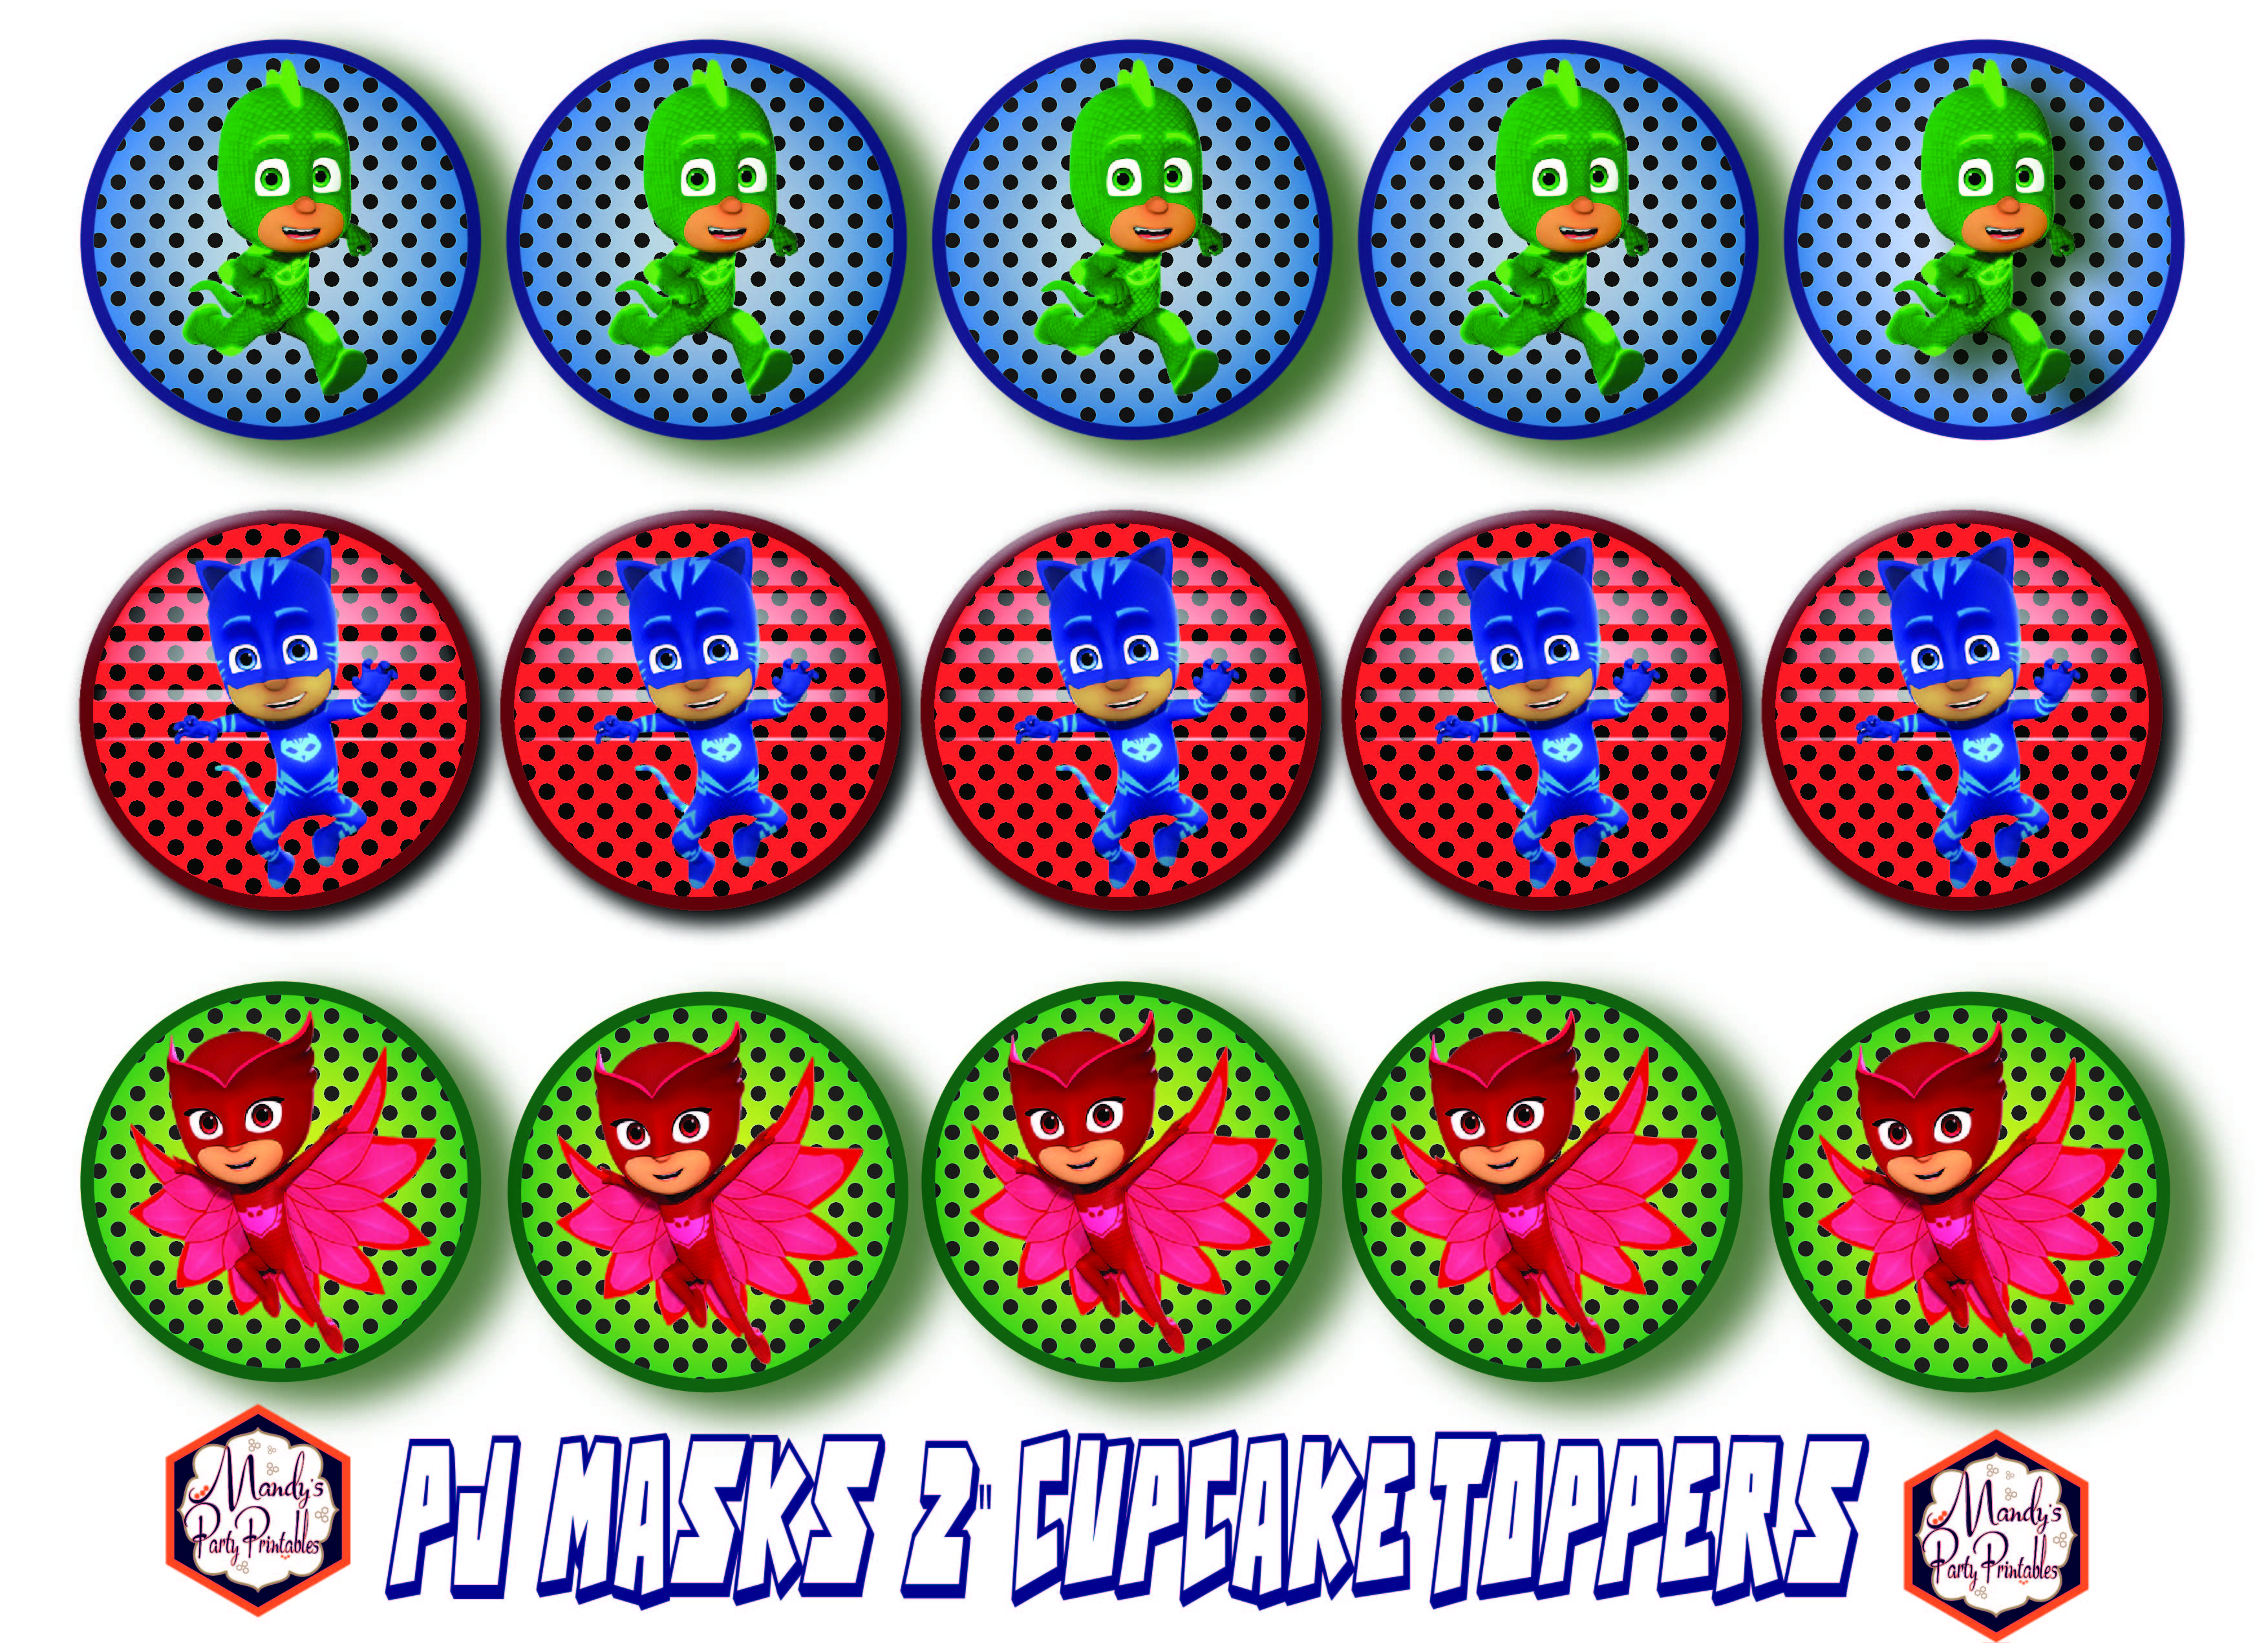 Cupcake Toppers from Free PJ Masks Birthday Party Printables via Mandy's Party Printables